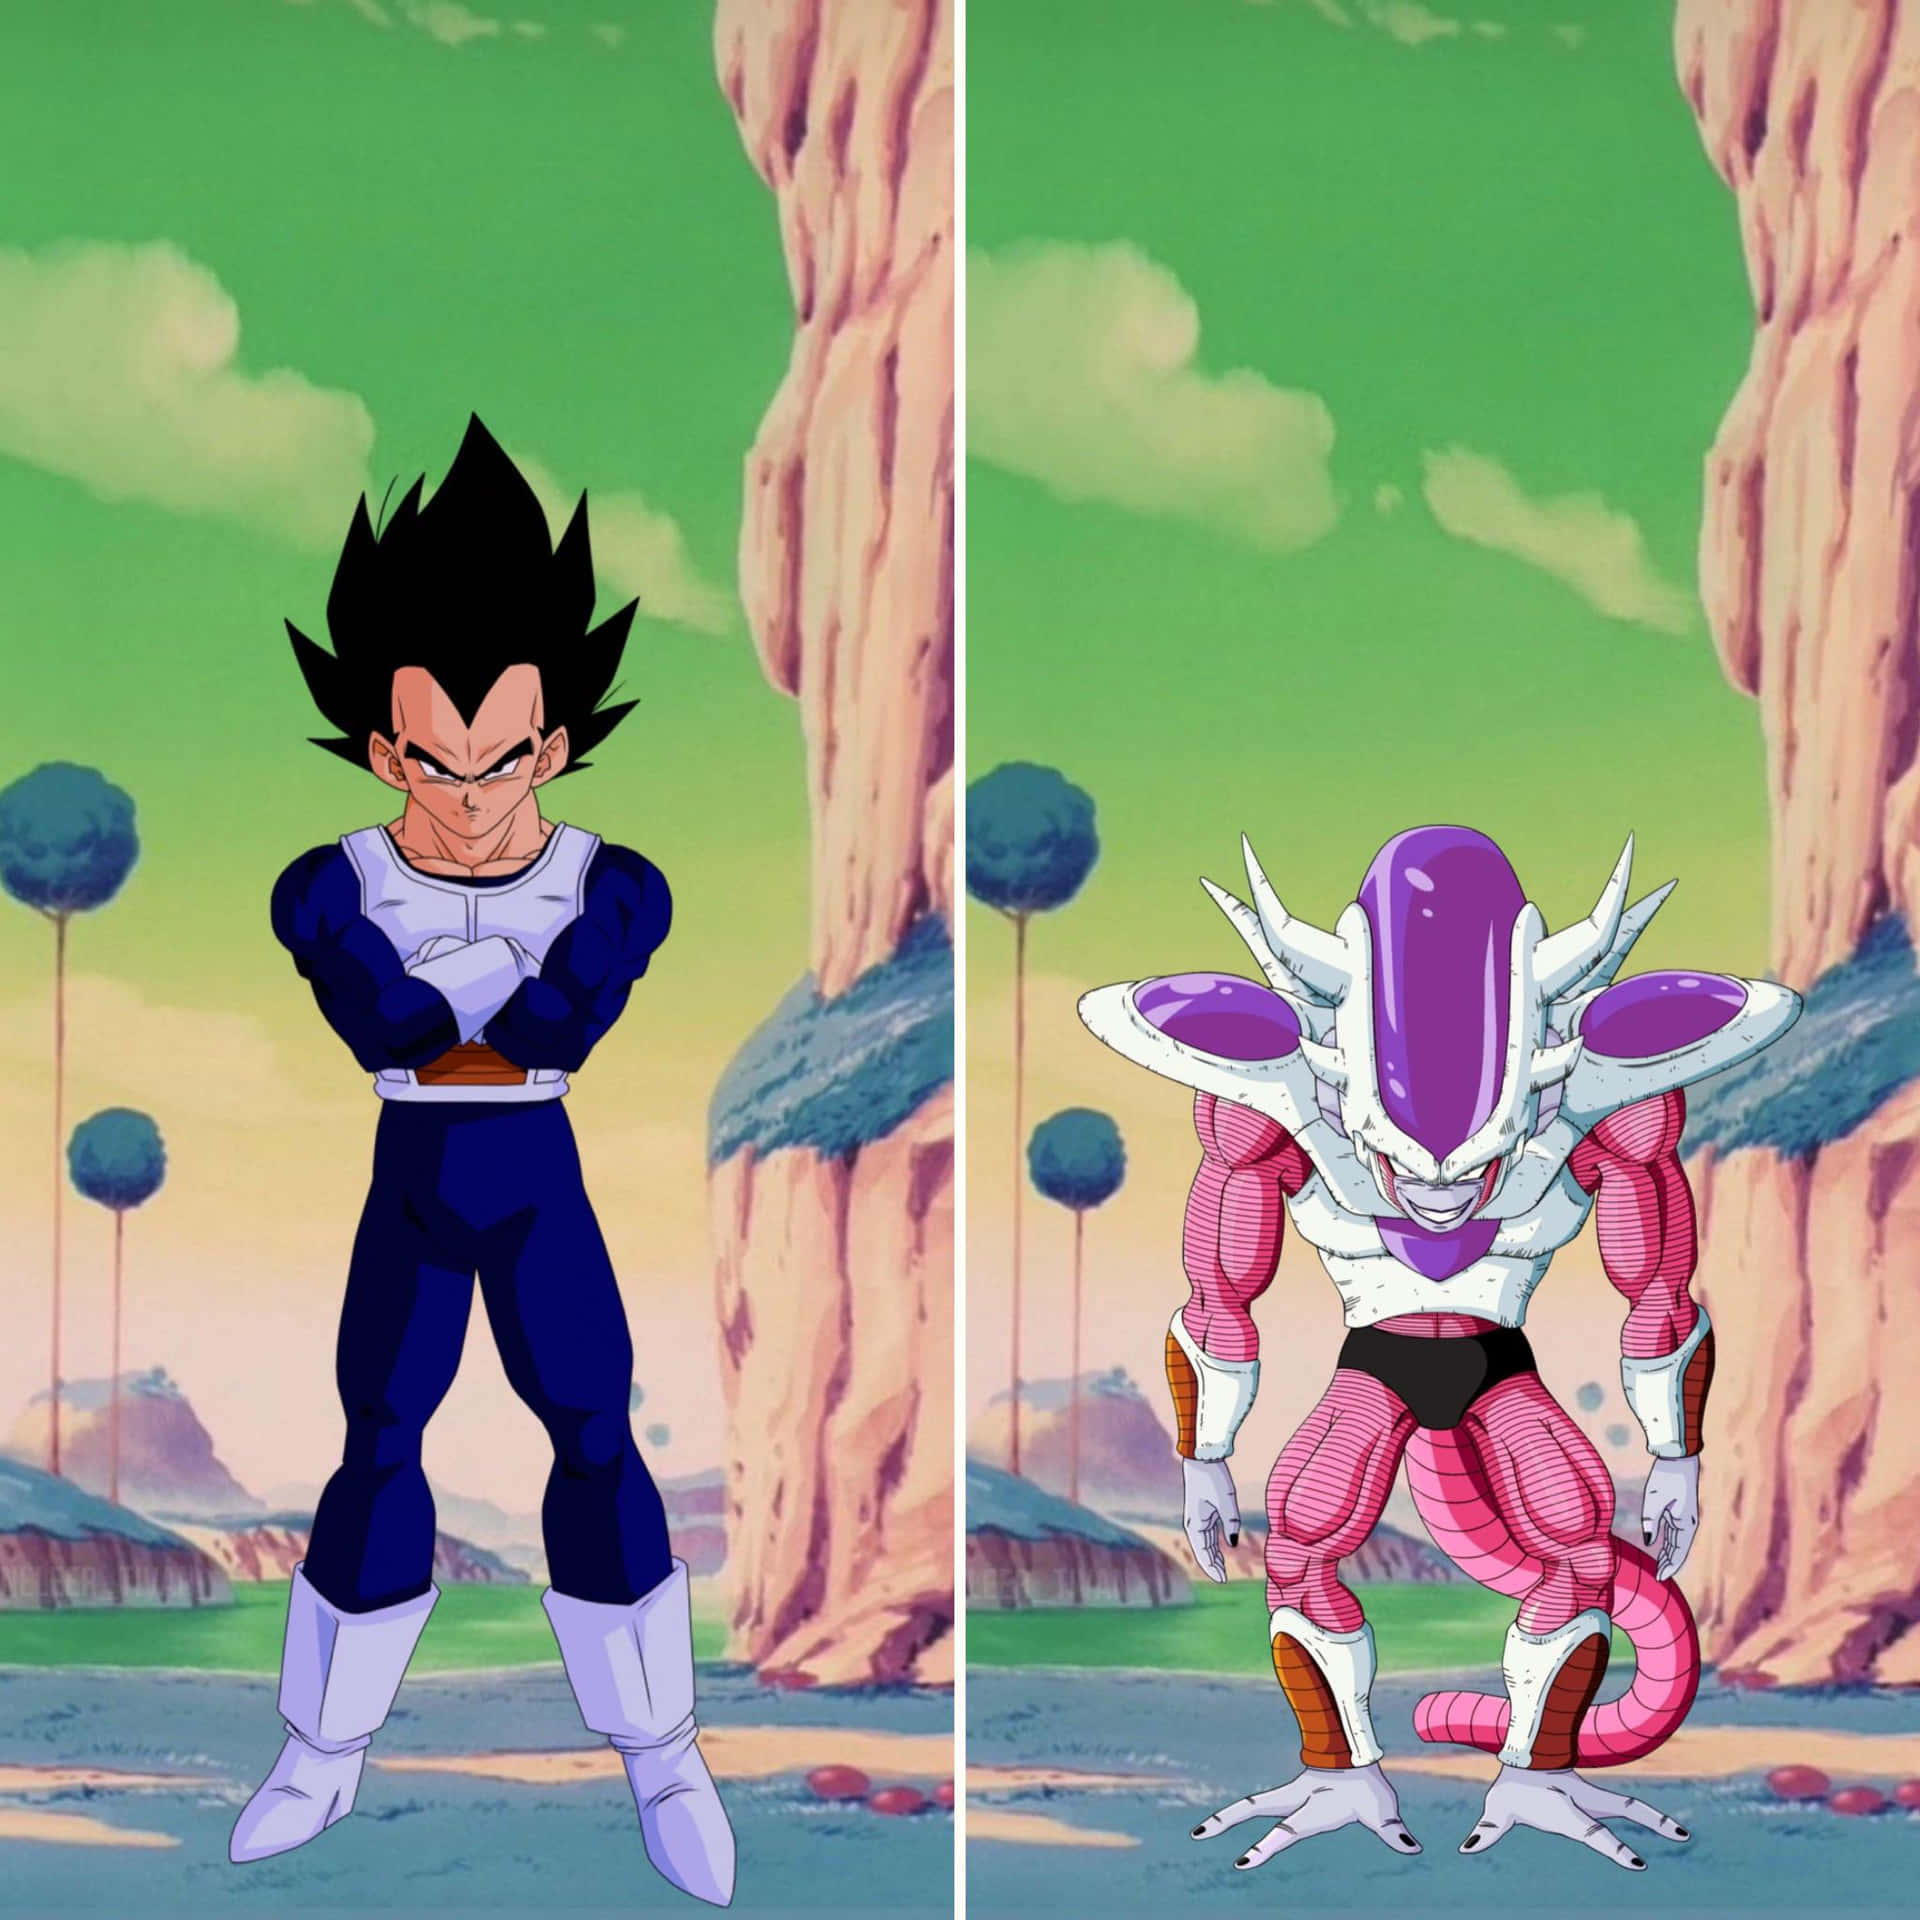 Unstoppable Forces - Vegeta and Frieza Locked in Battle Wallpaper